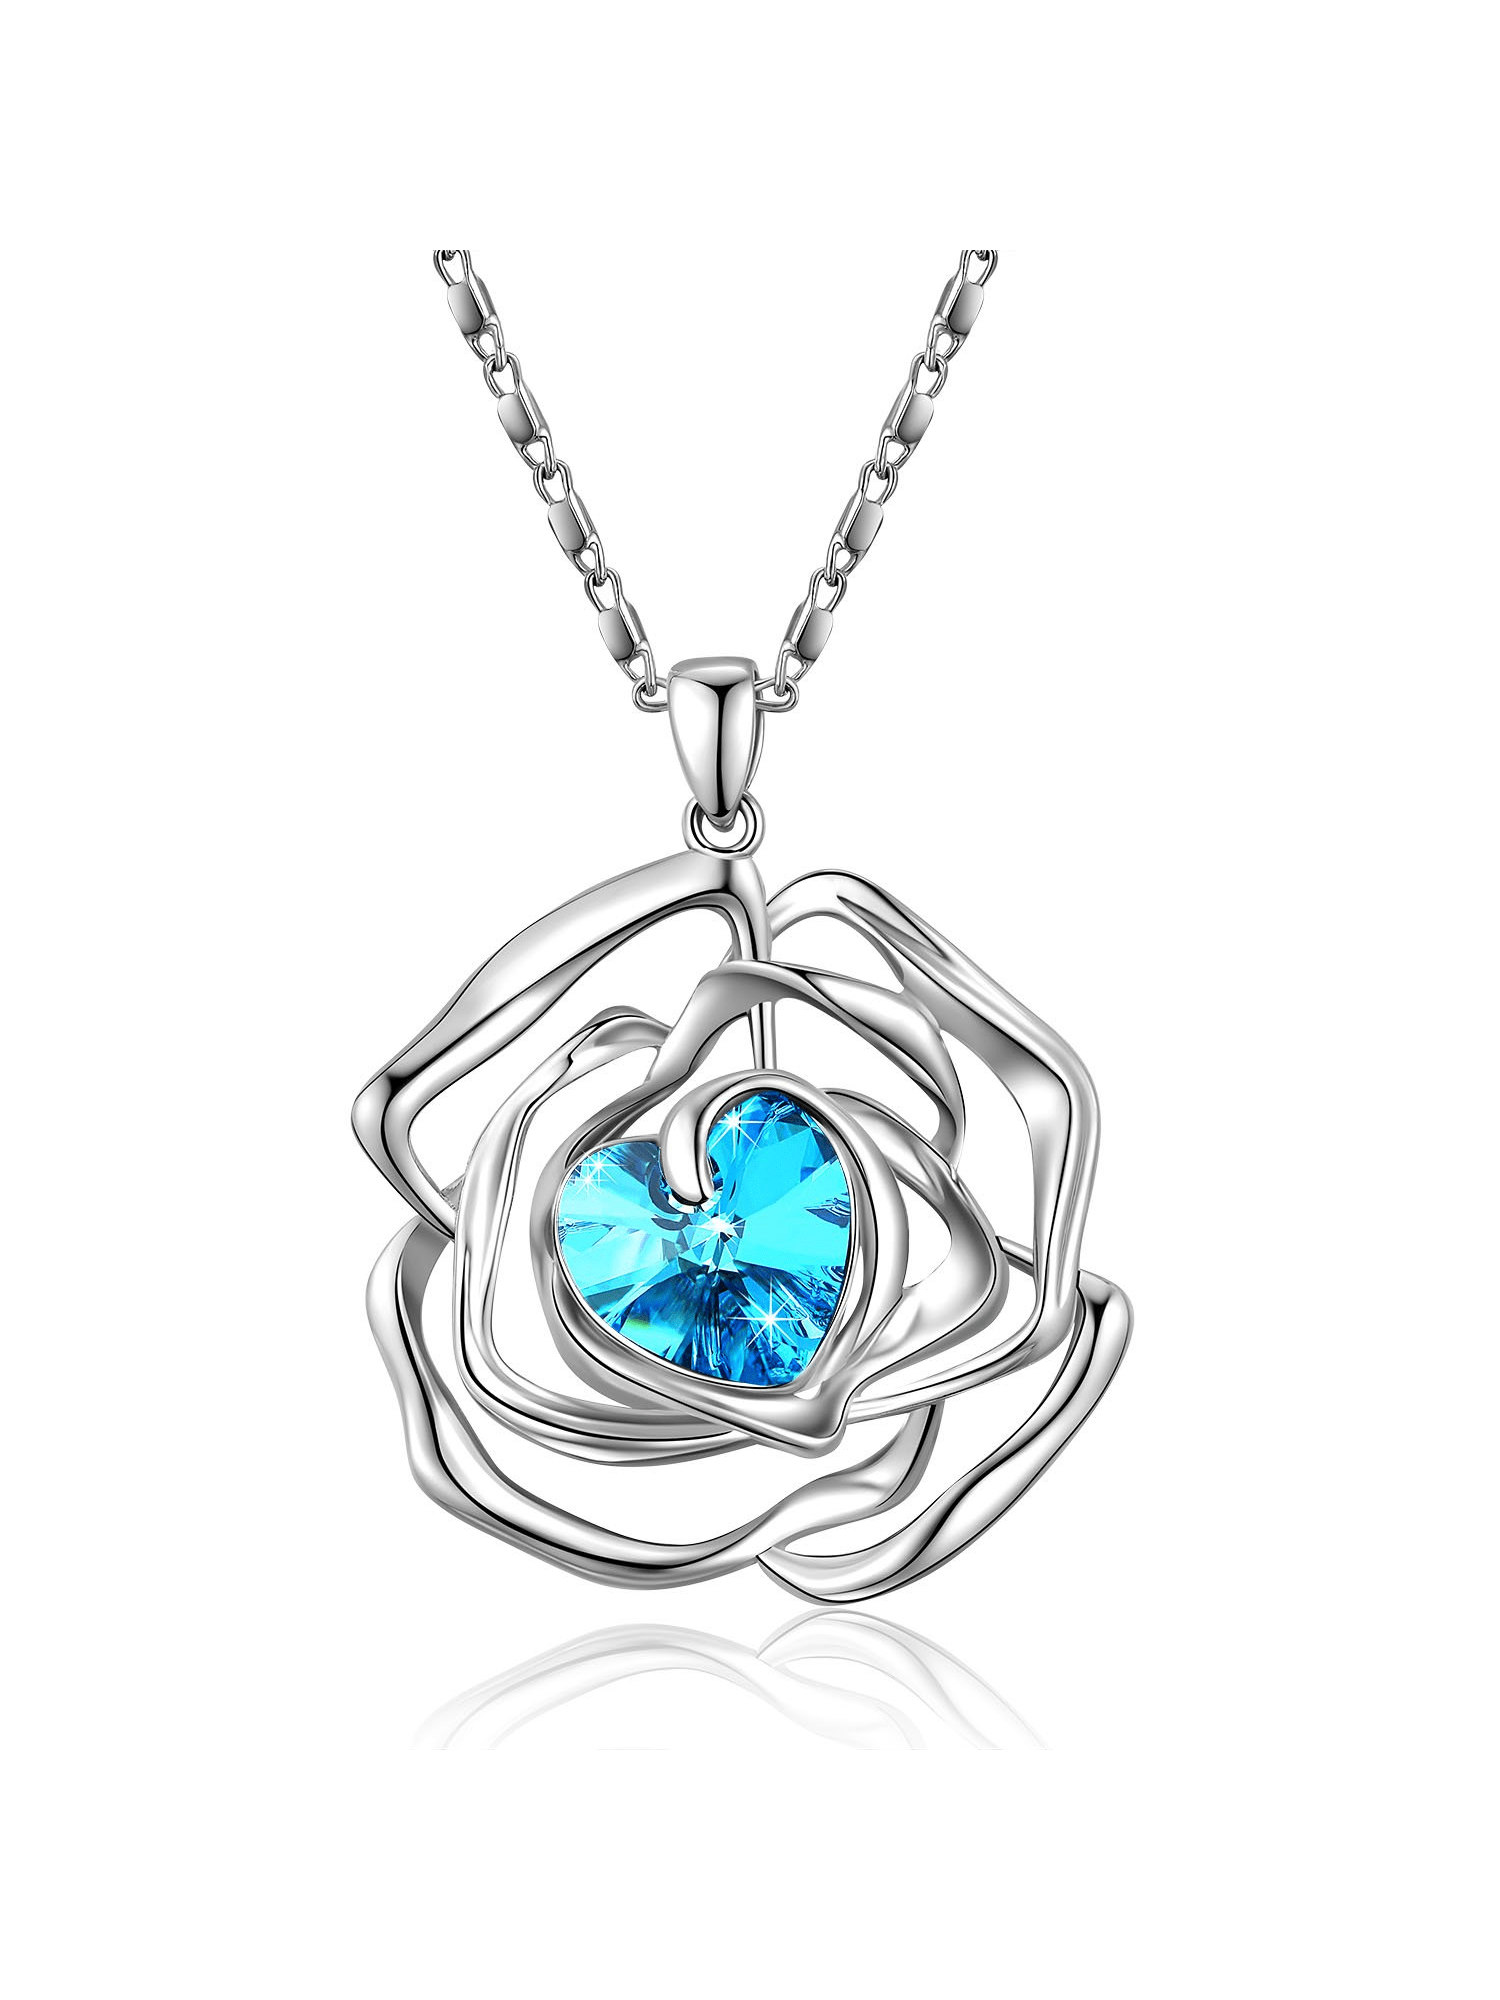 White Gold Love Heart Pendant Necklace With Blue Sapphire Crystals Gifts For Woman